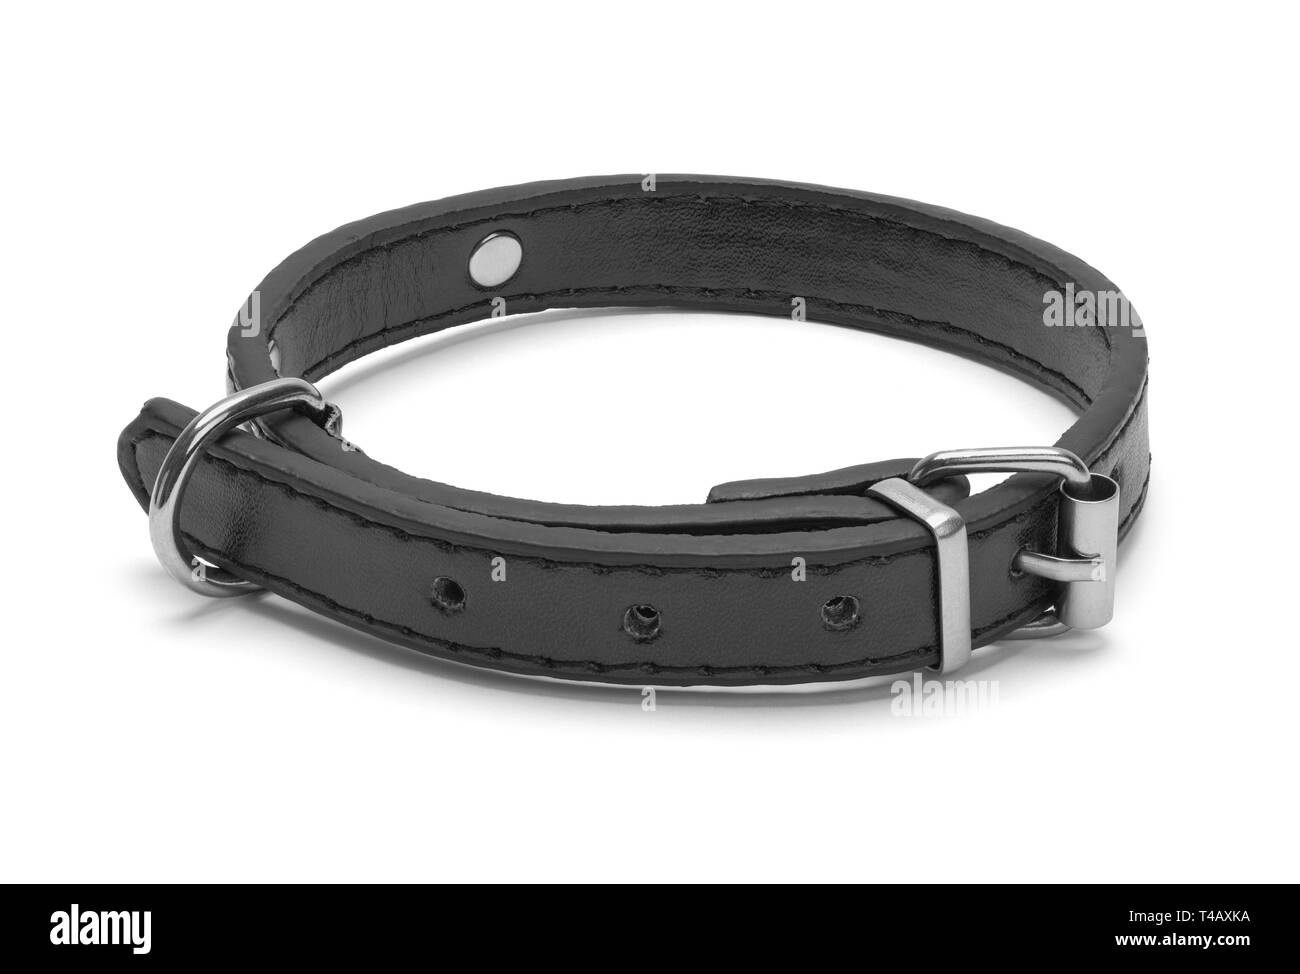 Small Black Leather Pet Collar Isolated on White Background. Stock Photo